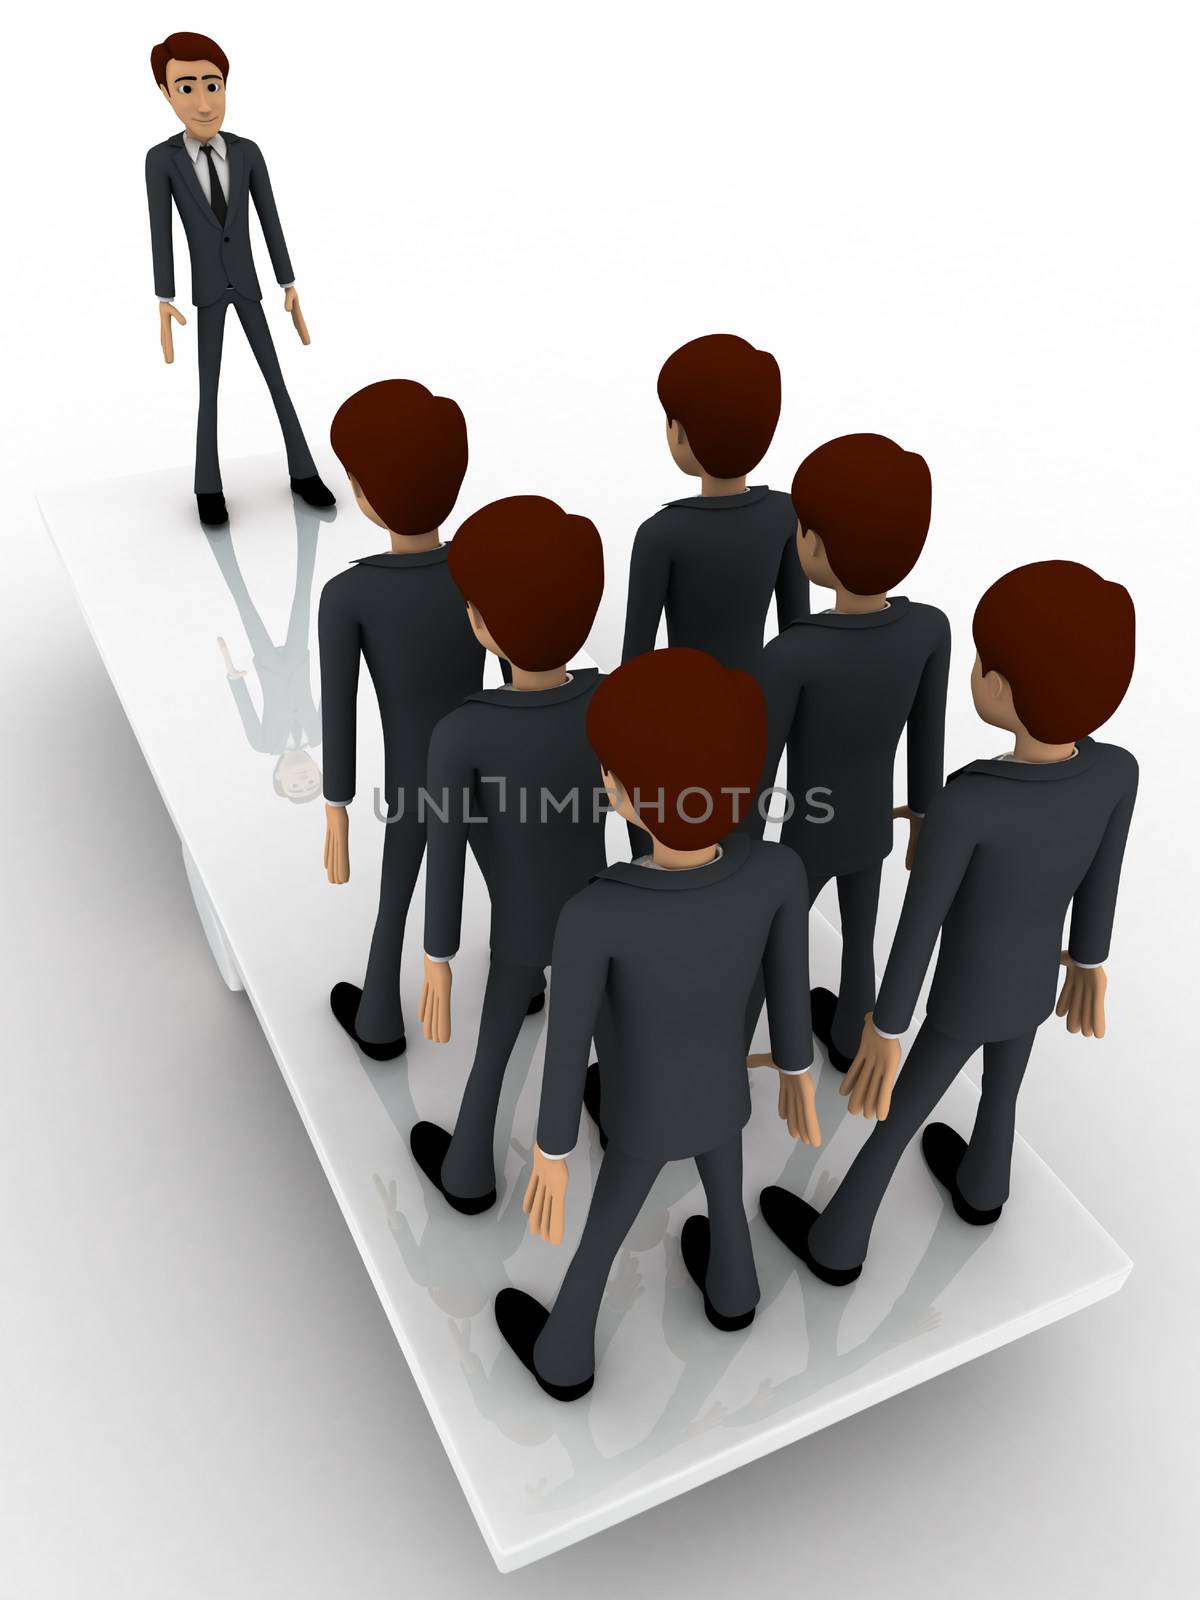 3d business man standing on seasaw to create balance concept by touchmenithin@gmail.com